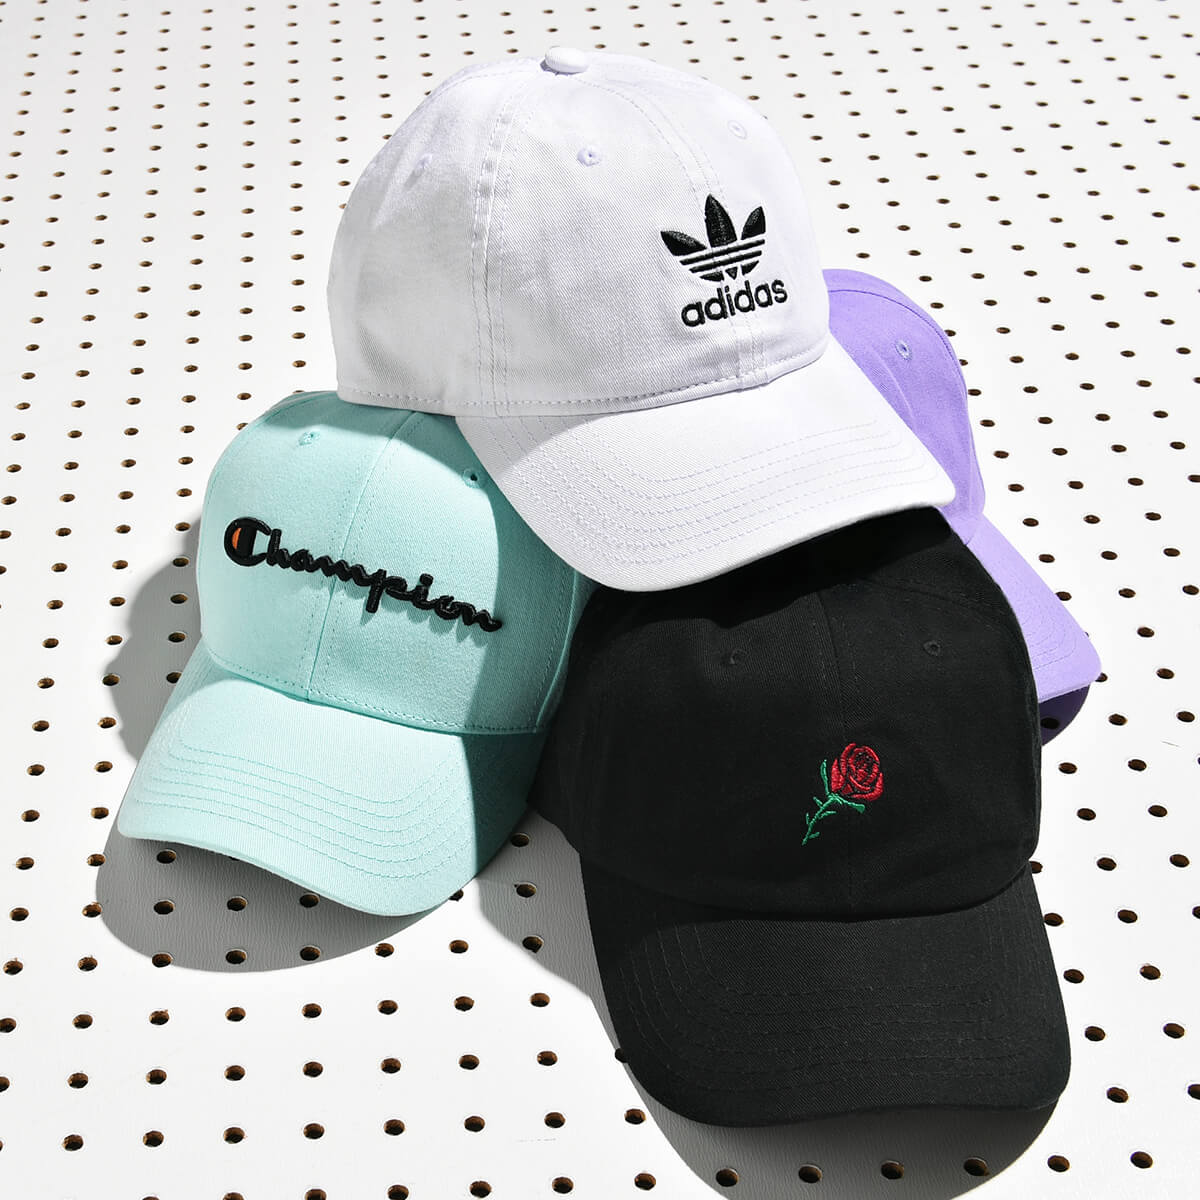 DAD HATS FROM TOP BRANDS - SHOP NOW